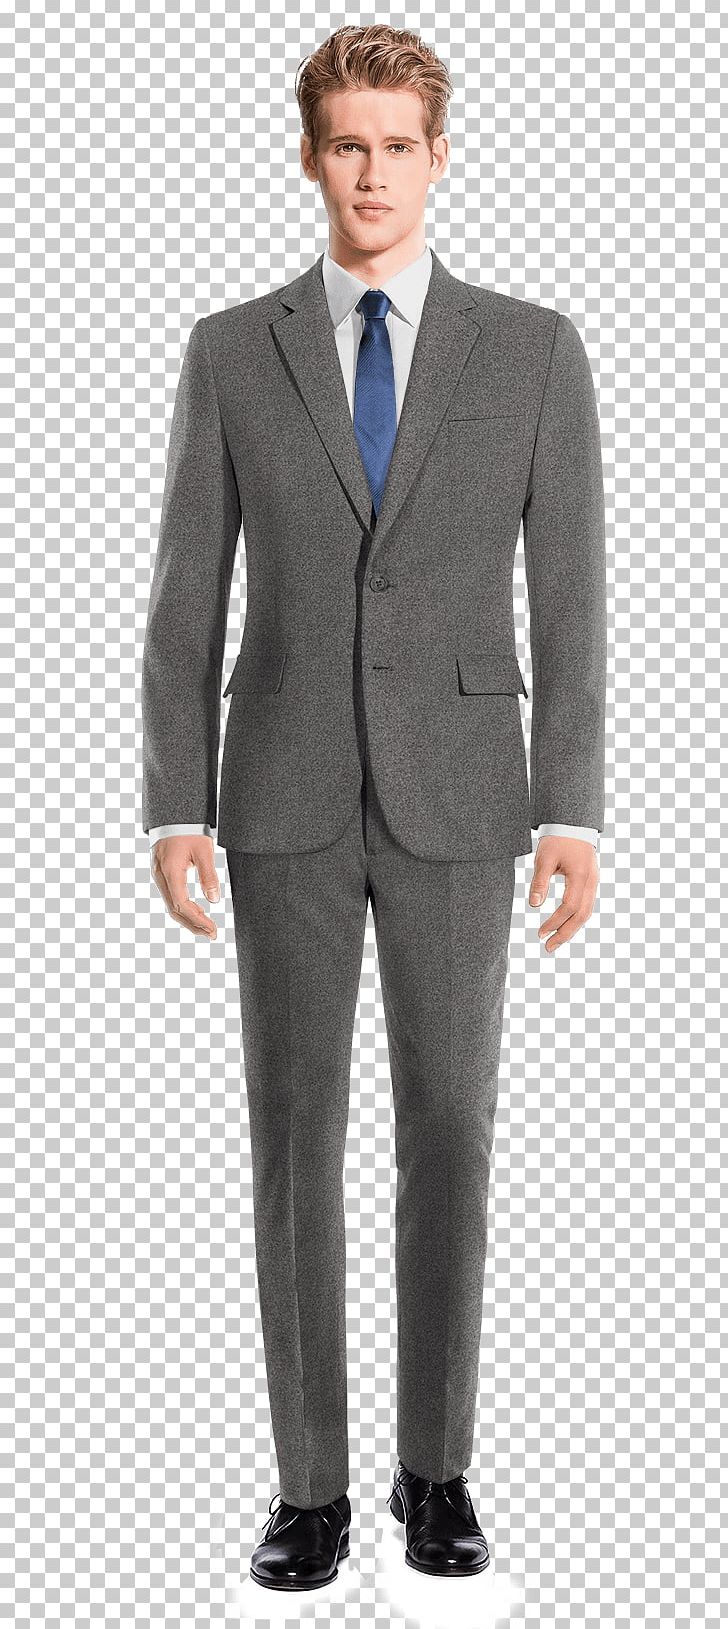 Suit Wool Tweed Blue Paisley PNG, Clipart, Beige, Blazer, Blue, Business, Businessperson Free PNG Download